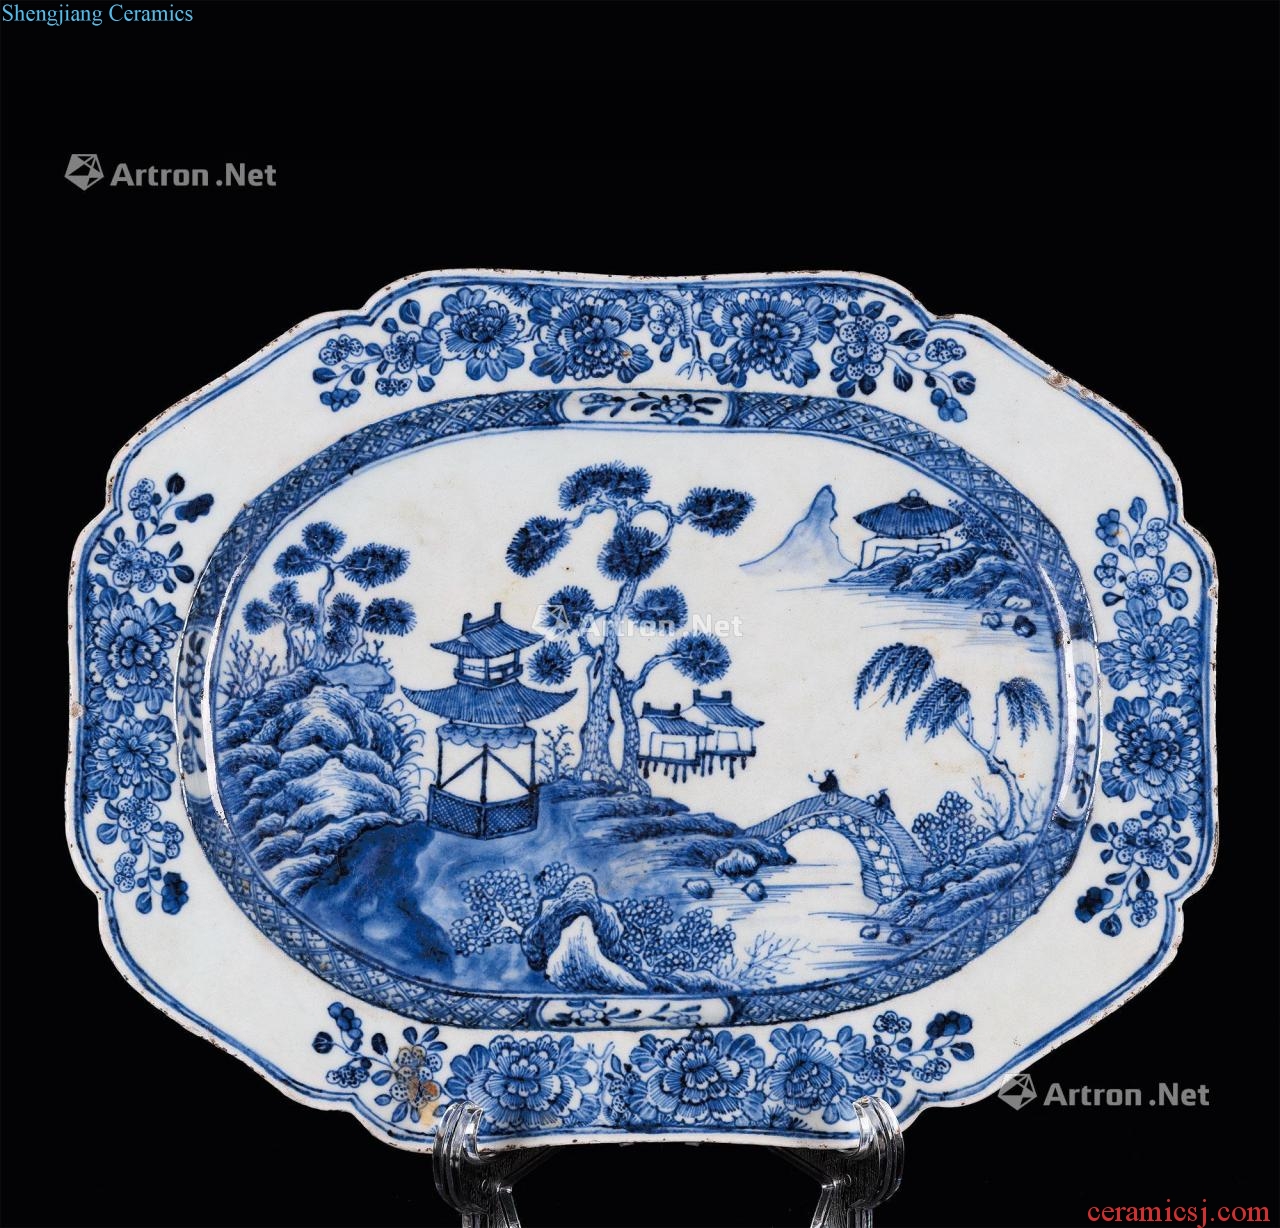 In the qing dynasty Eight square plate in the qing dynasty blue and white landscape pattern